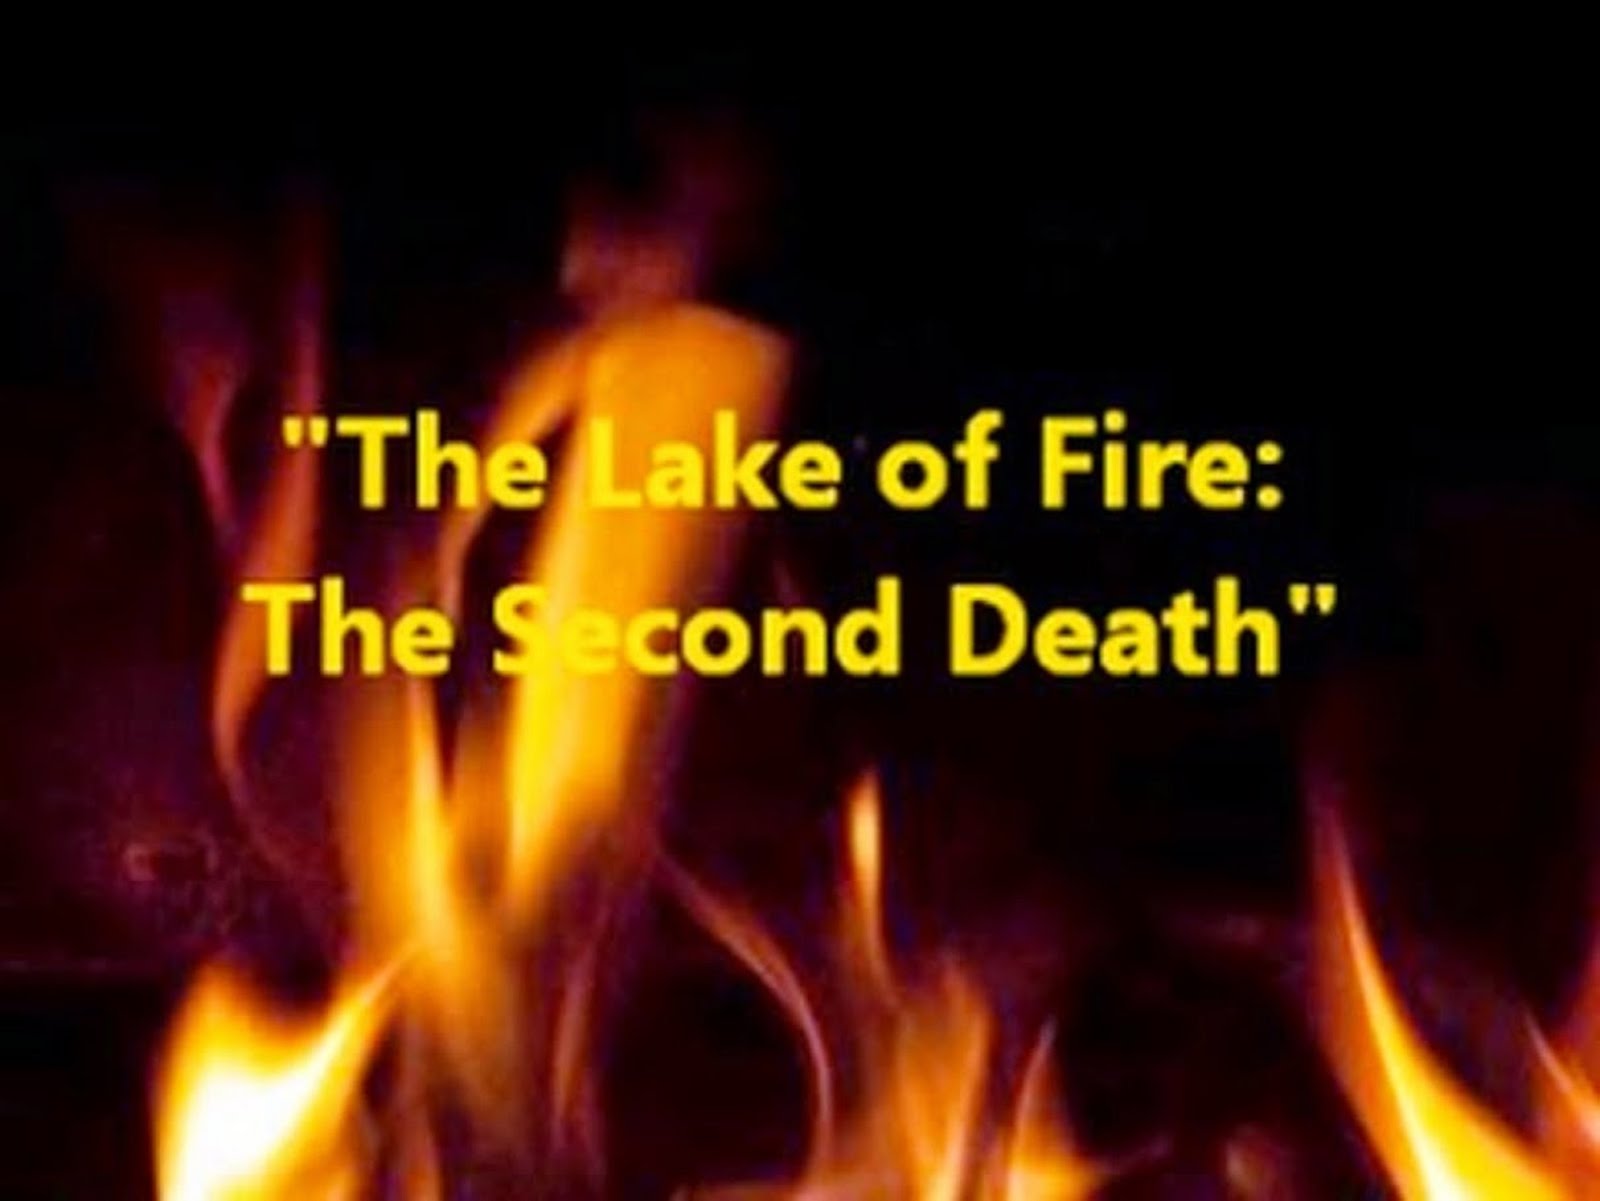 "THE LAKE OF FIRE - THE SECOND DEATH"